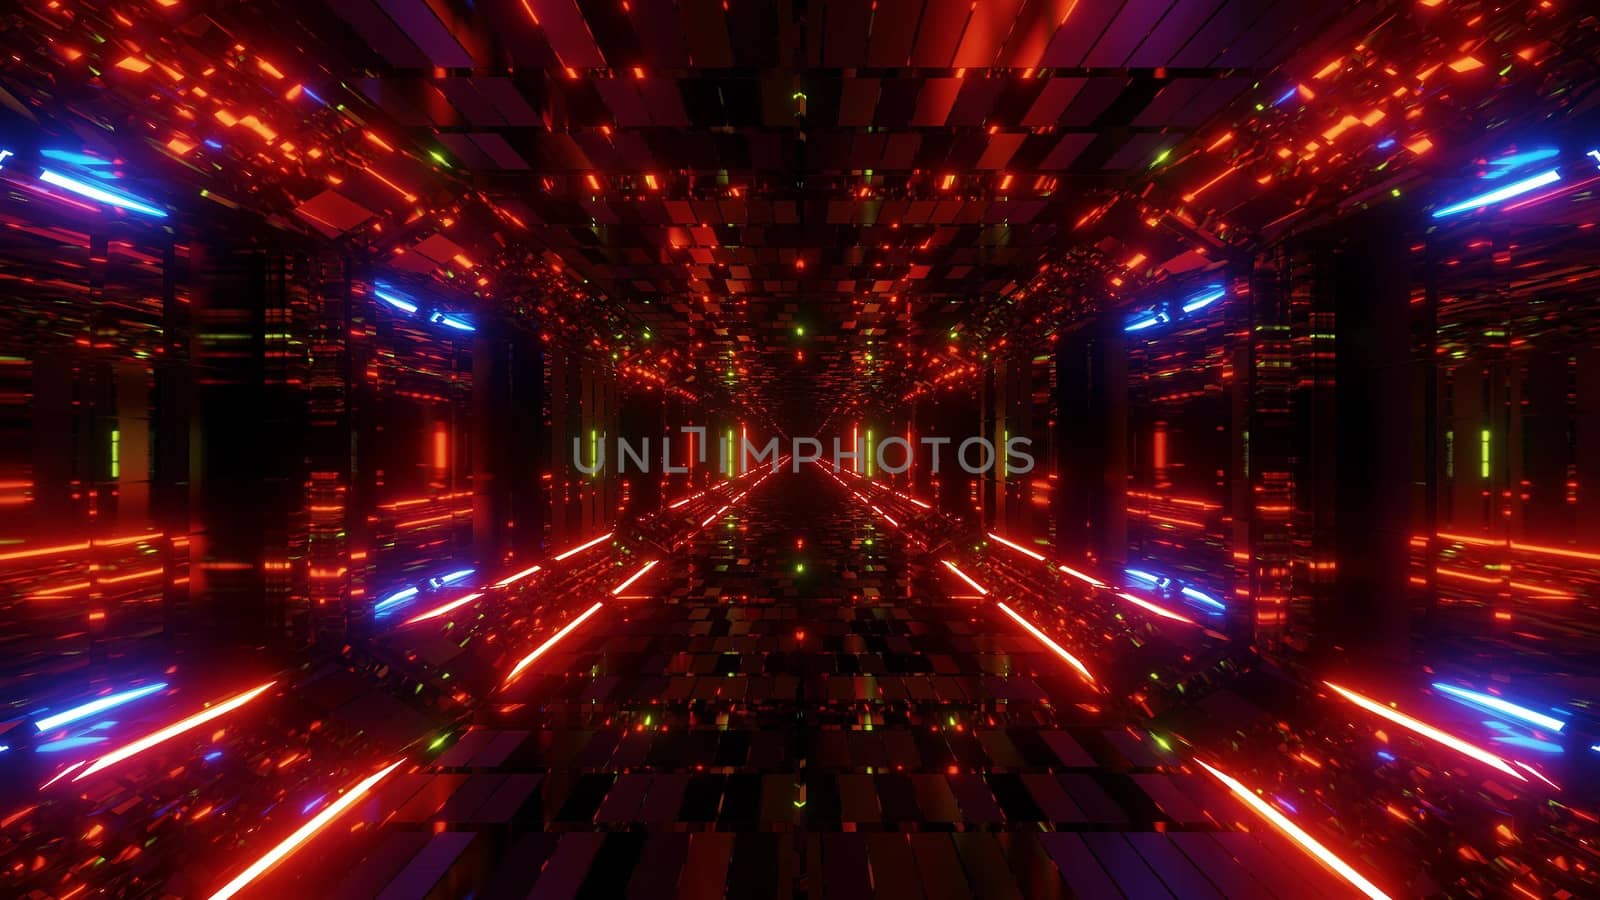 future scifi bricks textured hangar tunnel corridor with nice glowing lights and reflections 3d illustration wallpaper background, endless glowing light 3d rendering design